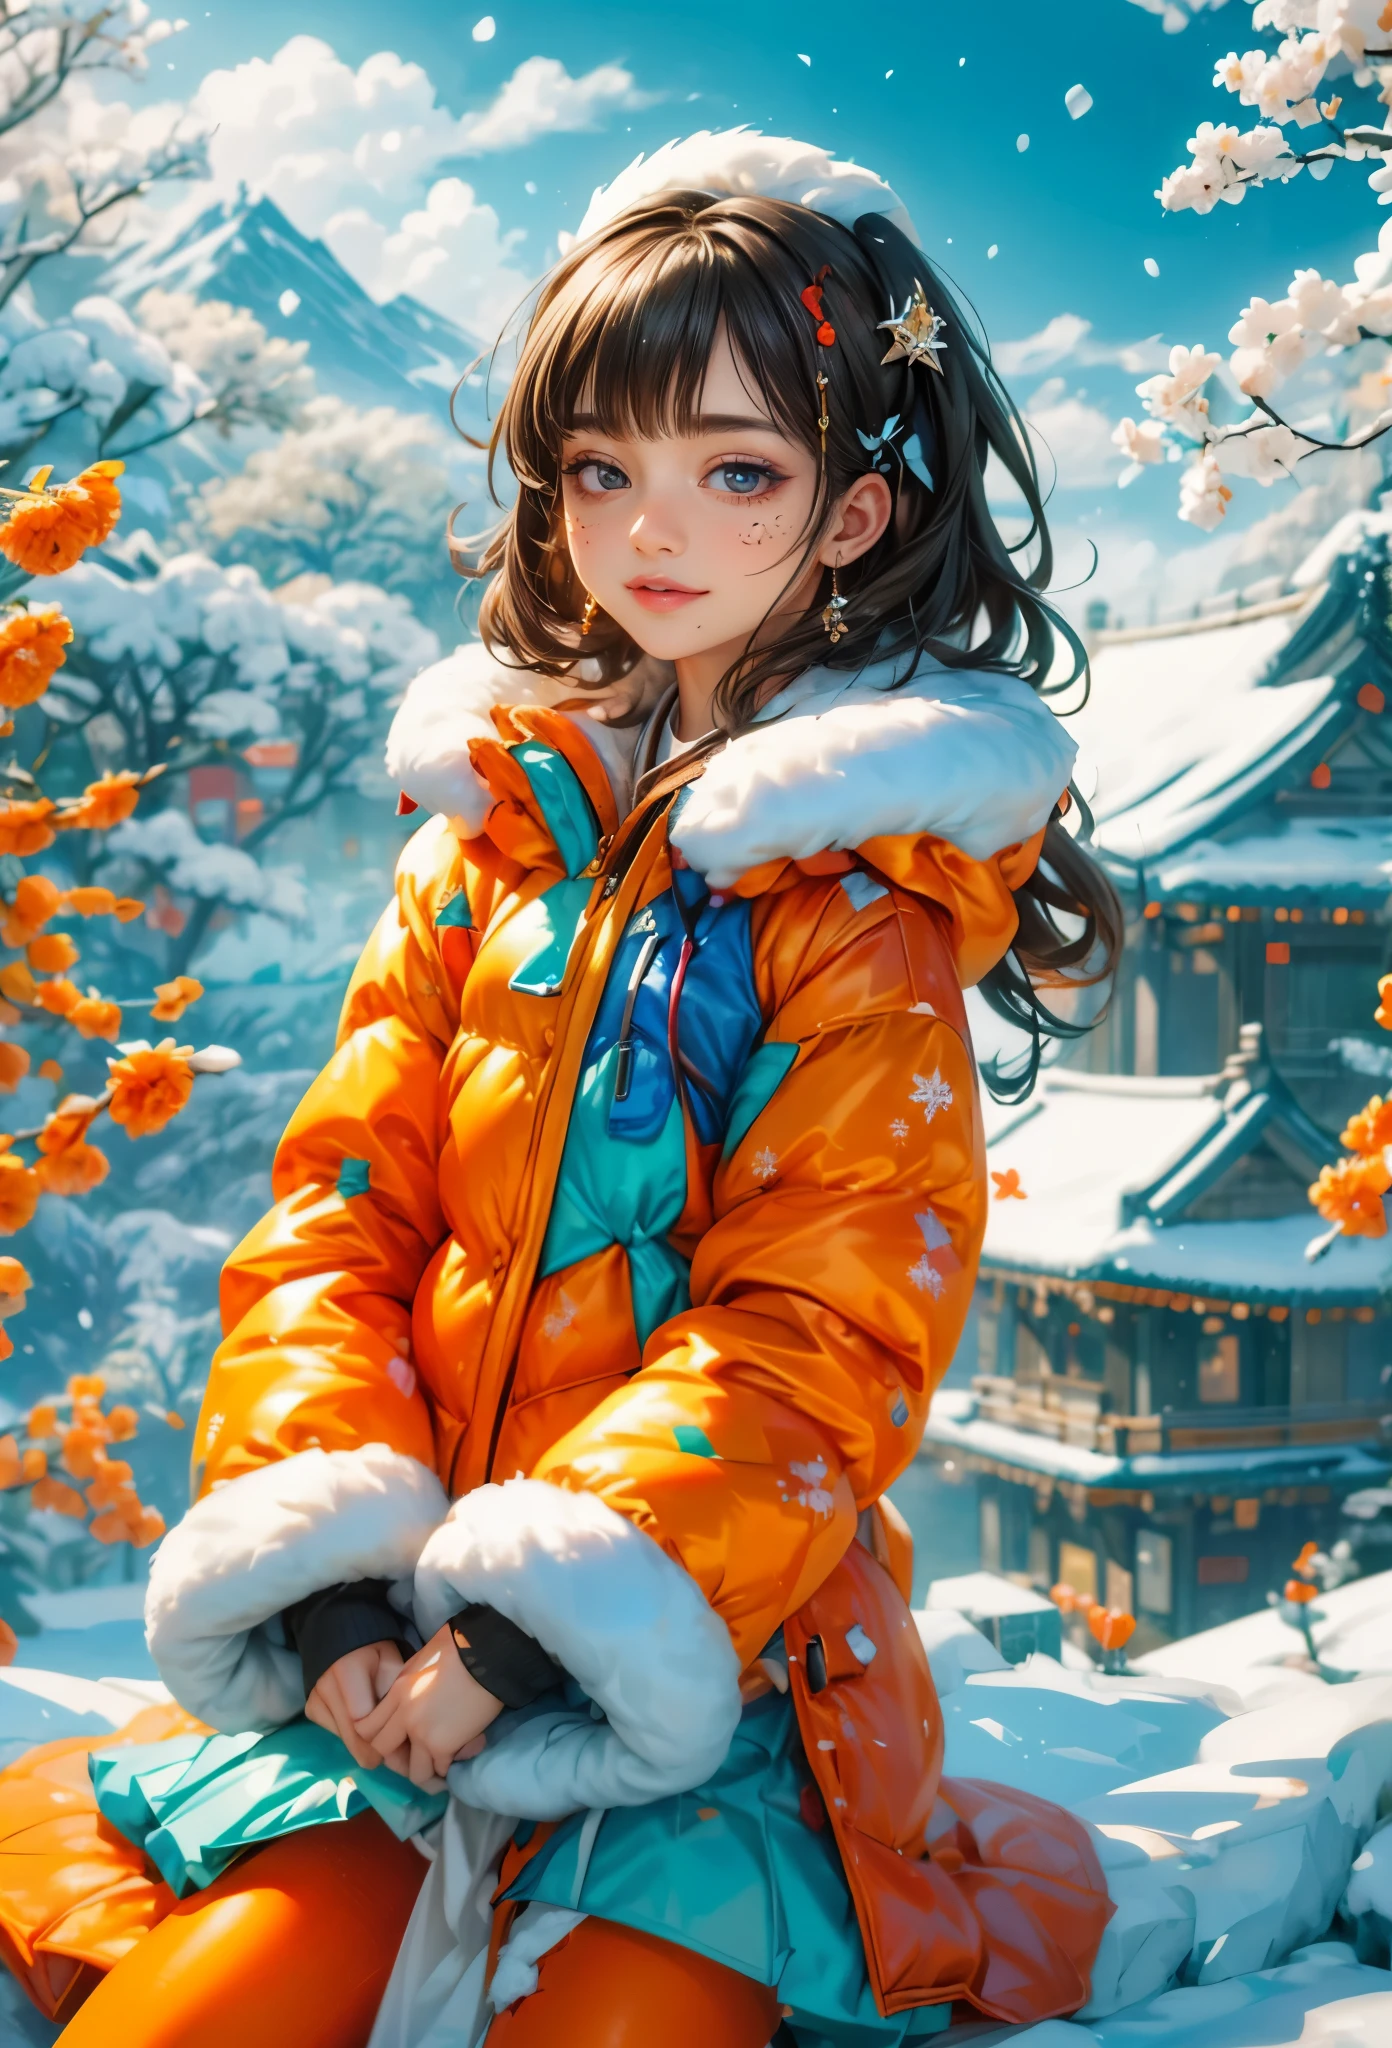 (masterpiece,best quality:1.5),Surreal,32k,original photo,(High detail skin:1.2), 8k ultra high definition, SLR camera, soft light, high quality, film grain,Beautiful lighting ,(panoramic:1.5), An imaginative and detailed illustration of a fantasy female friend, depicted as a cute and beautiful girl. Her face is lit up with a happy smile, and she is fashionably dressed in a bright orange puffer jacket. The setting is a magical ice sculpture world, with an icy, snowy landscape filled with snowflakes. The girl is a blend of wisdom, beauty, and diligence, representing a sweet and ideal character. The image is created with creative flair, showcasing the girl enjoying herself in this enchanting, frosty environment, embodying a sense of joy and wonder, (Ultra high saturation, bright and vivid colors: 1.5), (nsfw), (Facing the viewer: 1.5),color palette, oil paint brush, paint splatter,, Japanese cartoons, （smiley face，Red enamel lips，bright red wet lips，lip gloss，red glowing lips，cosmetic，Makeup Eyes，korean girl，Her face is full of anticipation and courage for adventure，A smile appeared on her lips）